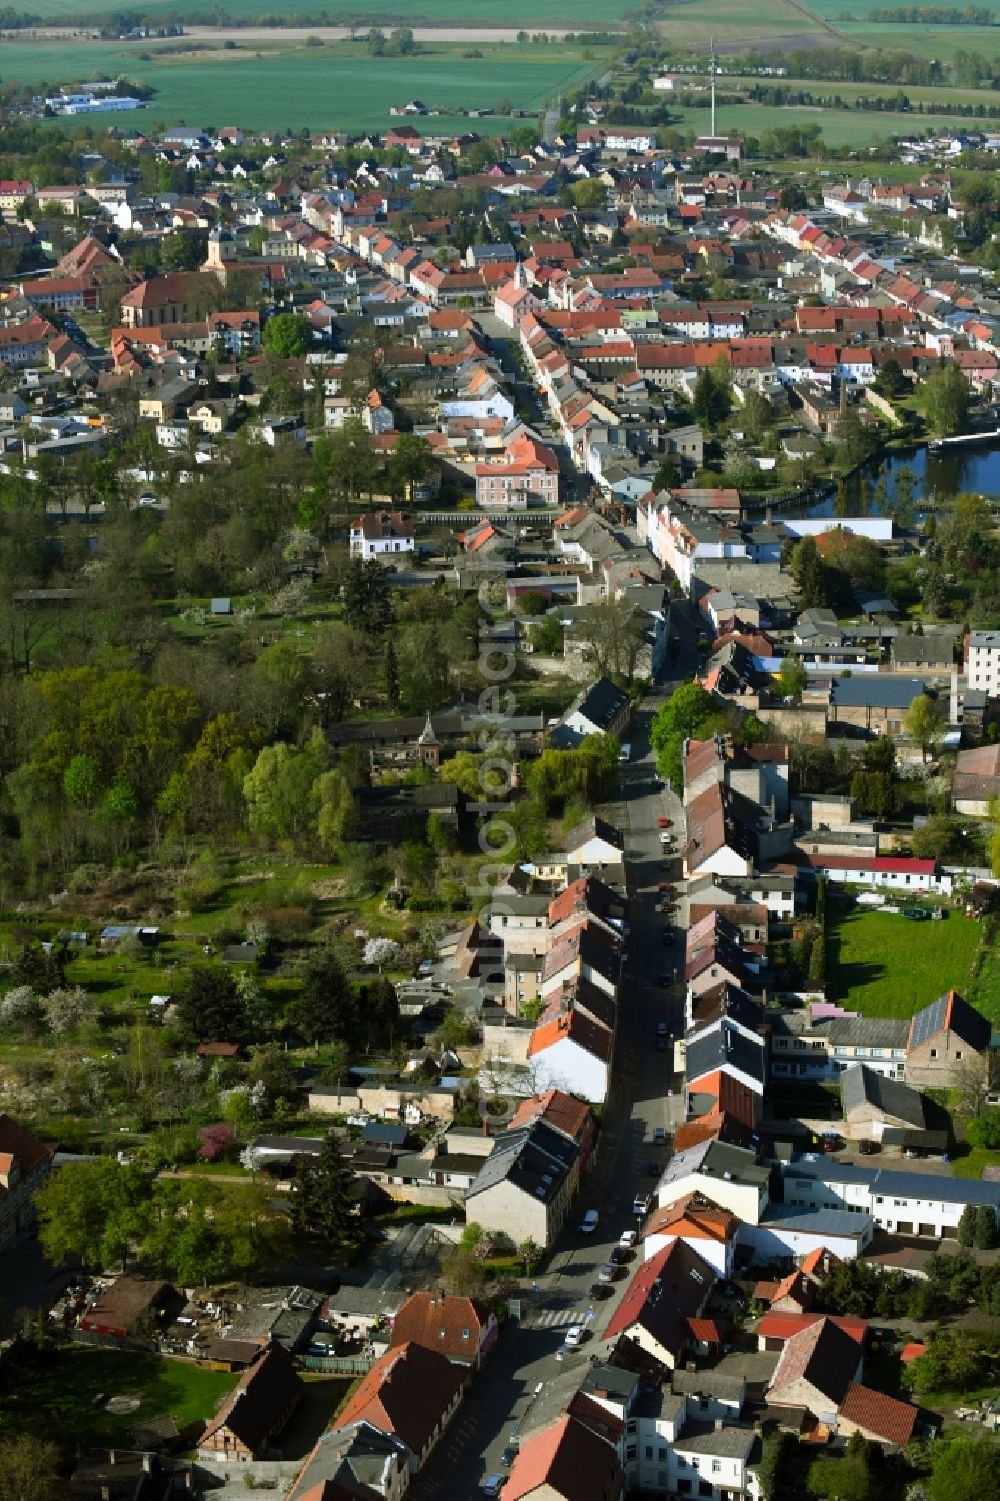 Aerial image Zehdenick - City view of the inner city area along Dammhaststrasse in Zehdenick in the state Brandenburg, Germany